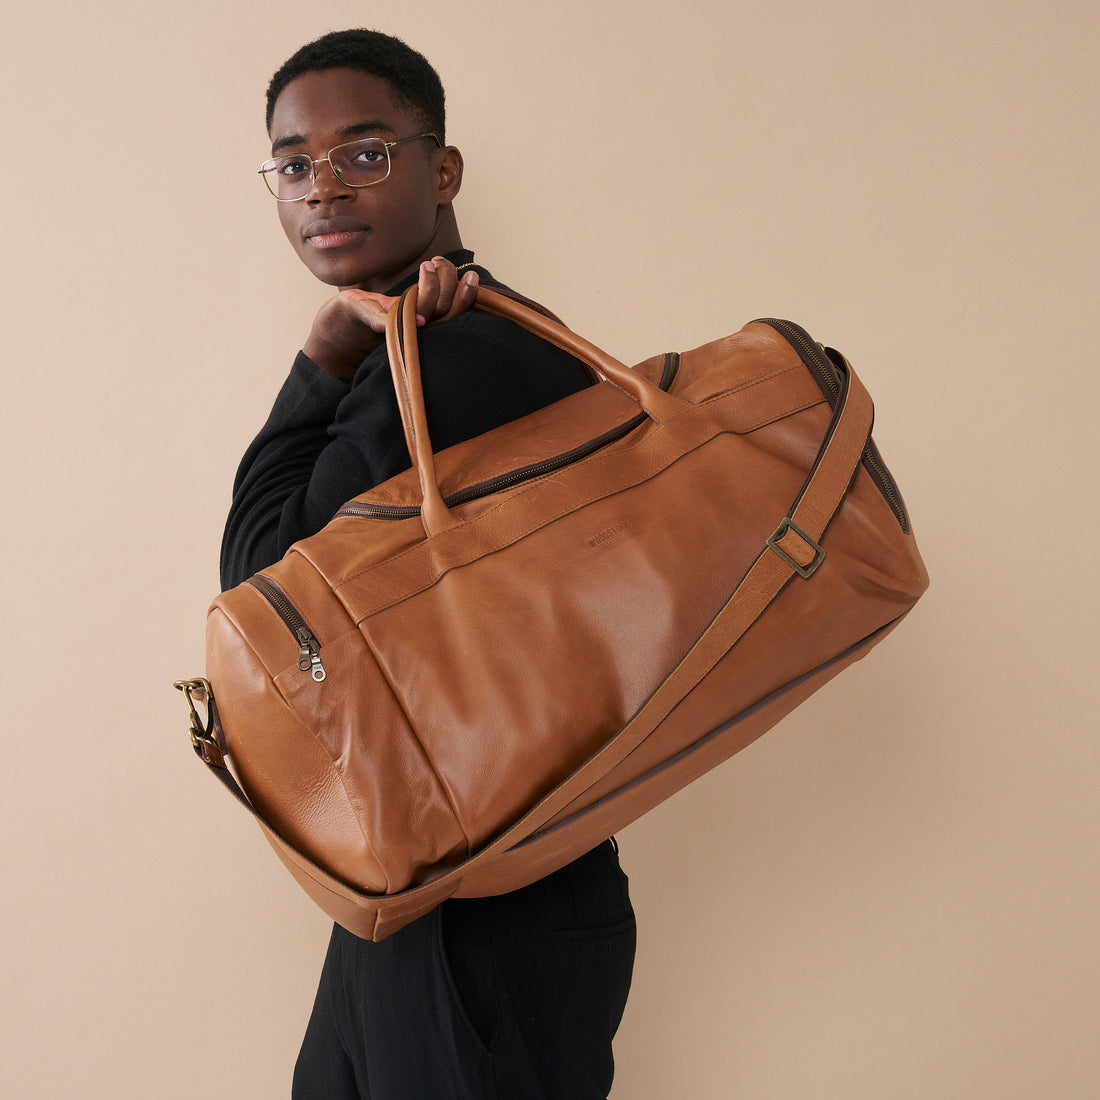 Model with Pecan Genuine Leather Sports Duffel Bag with Waterproof Lining &amp; Sneaker Compartment over his shoulder